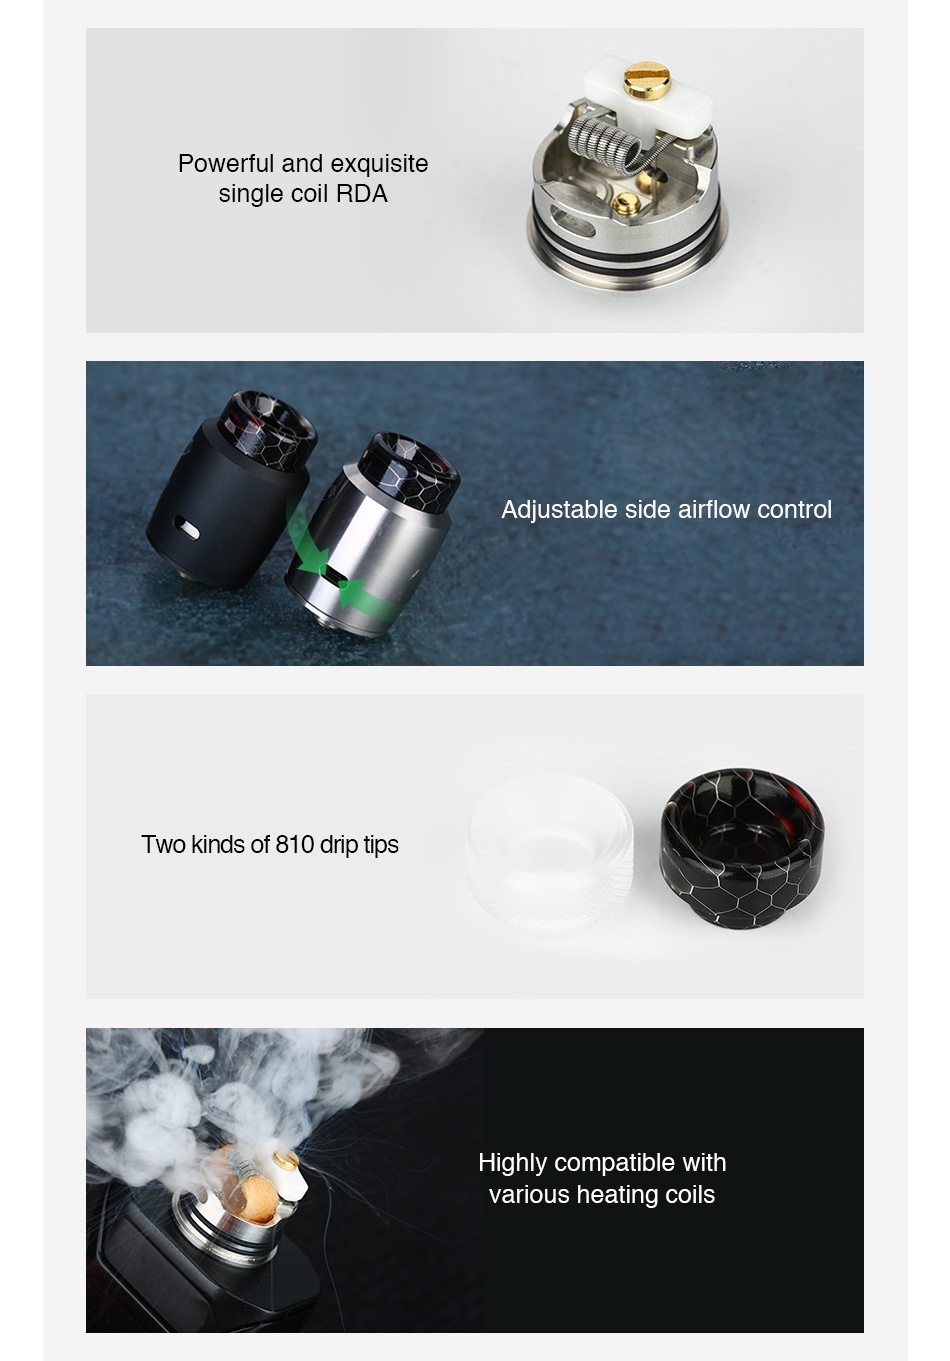 Blitz Ghoul BF RDA Powerful and exquisite single coil RDA Adjustable side airflow control Two kinds of 810 drip tips Highly compatible with various heating coils